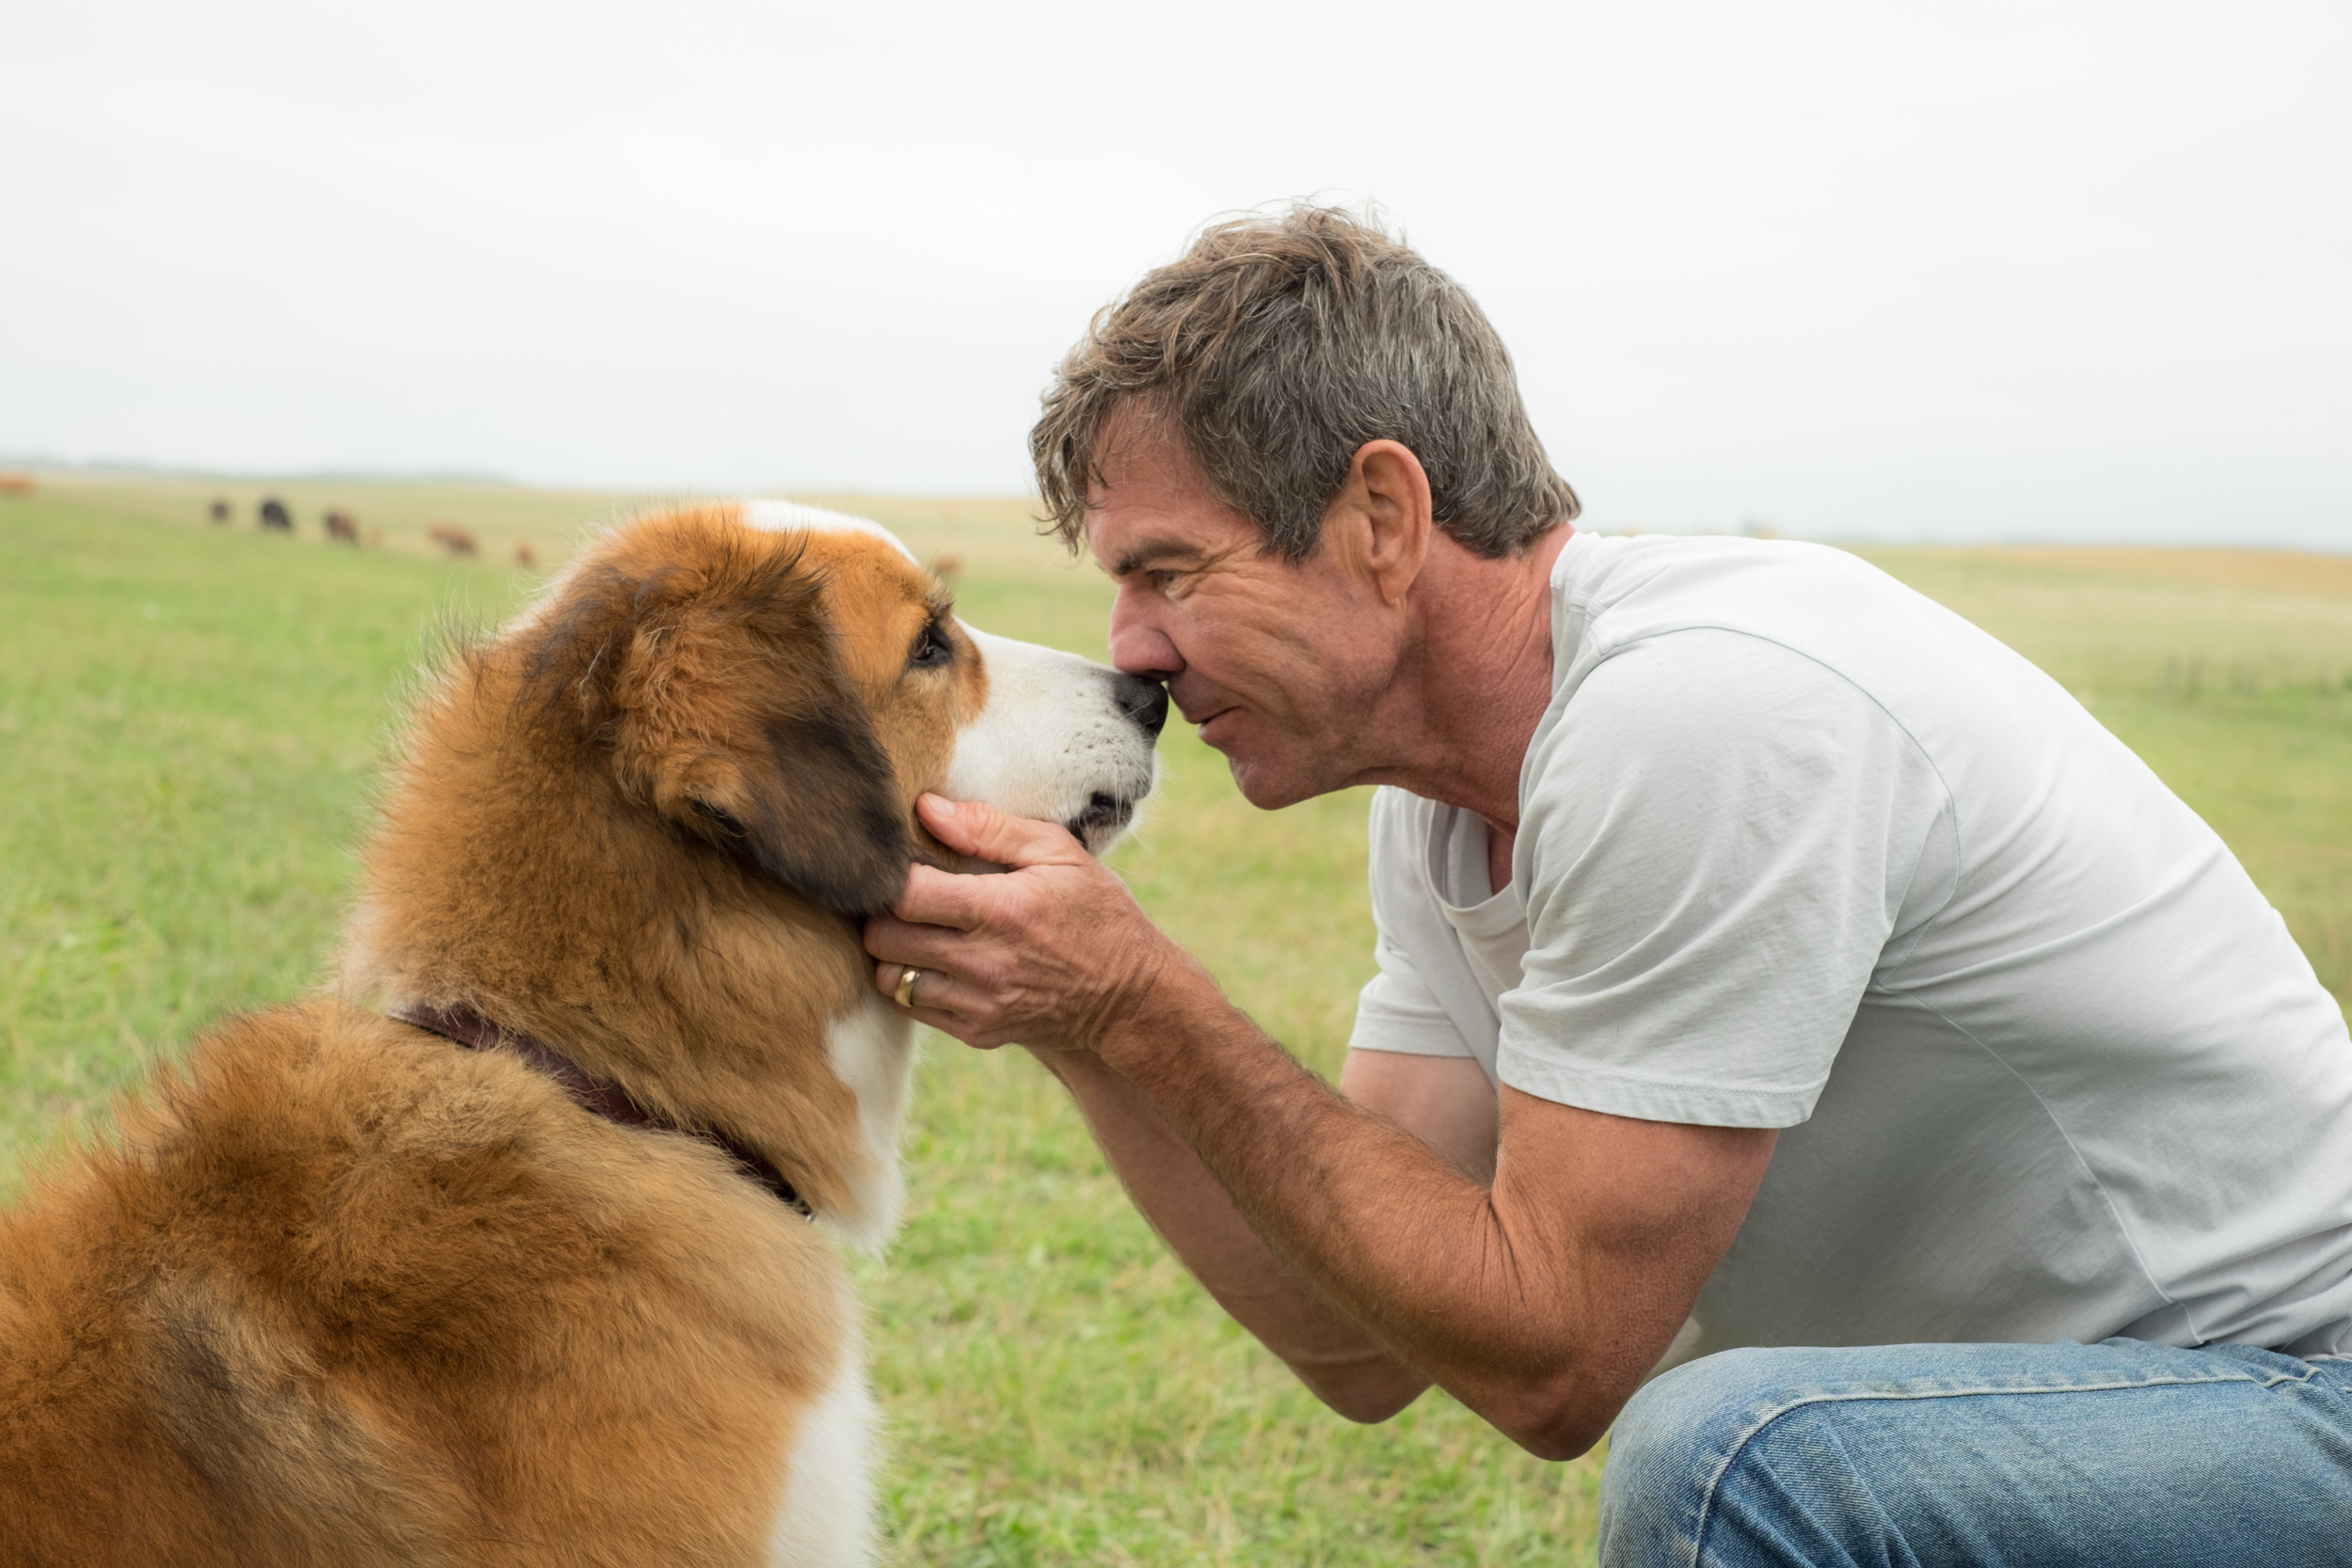 <p>Well, “A Dog’s Purpose” is certainly memorable. Is it good? We wouldn’t go that far, but this film about a dog that keeps getting effectively reincarnated definitely made a mark. It’s the dog movie that dares to kill the dog not just once, but multiple times!</p><p>You may also like: <a href='https://www.yardbarker.com/entertainment/articles/35_video_games_to_look_forward_to_in_2023/s1__38359453'>35 video games to look forward to in 2023</a></p>